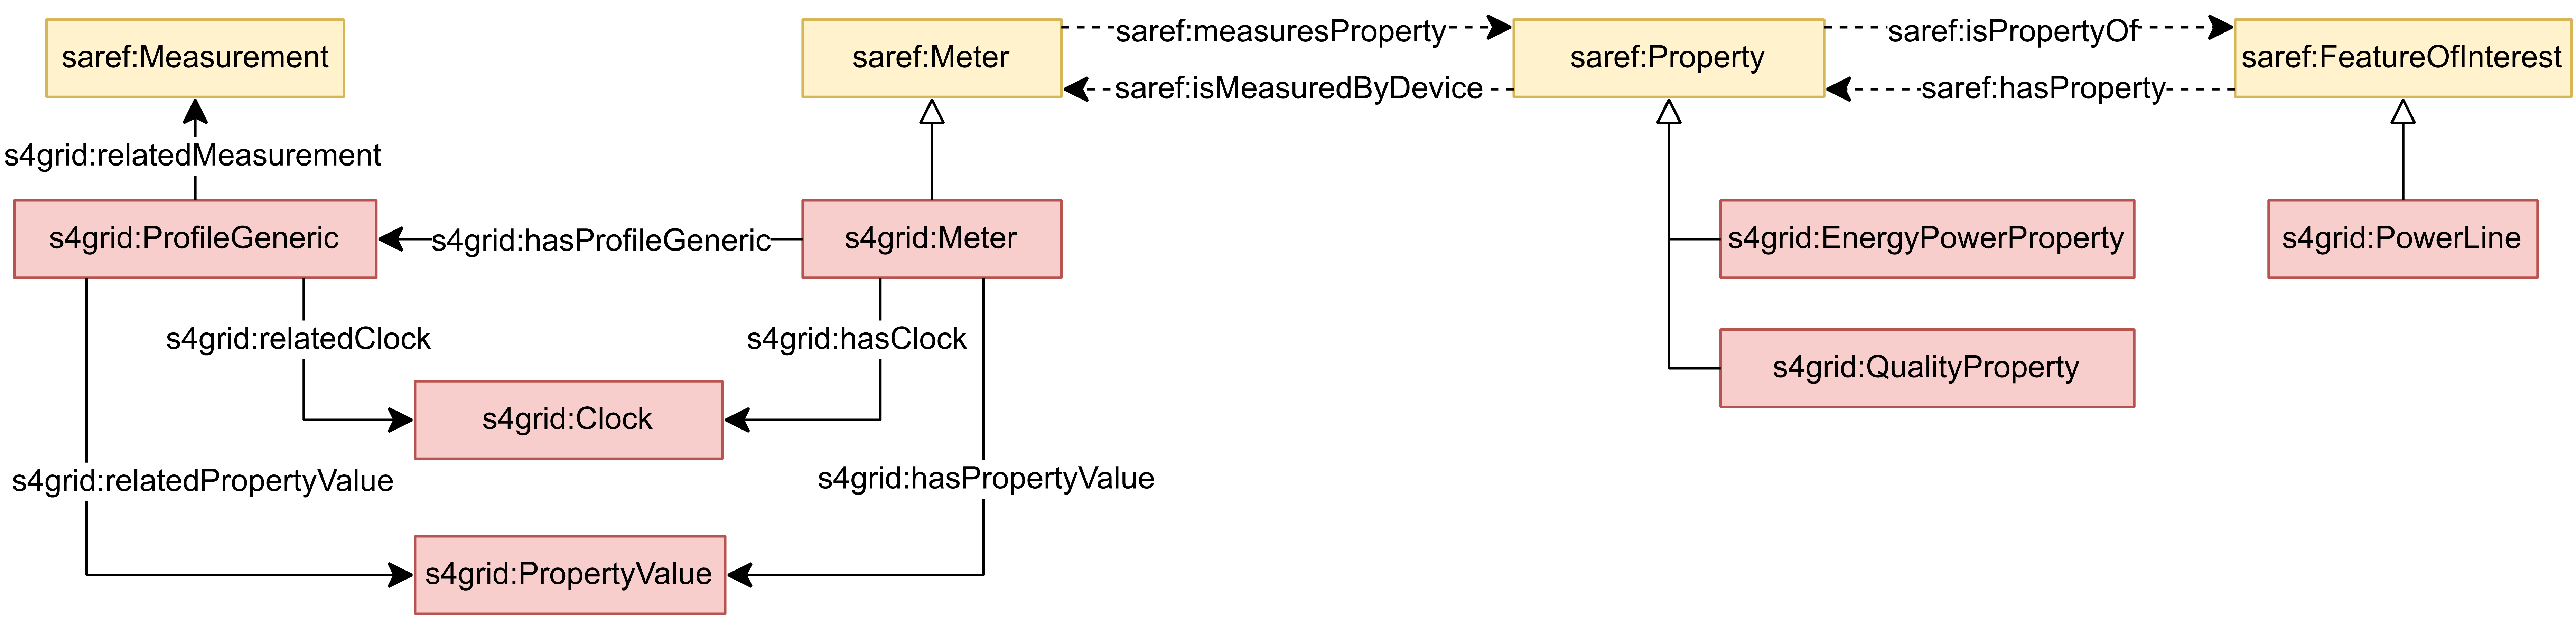 SAREF4GRID overview: Measurements and profiles